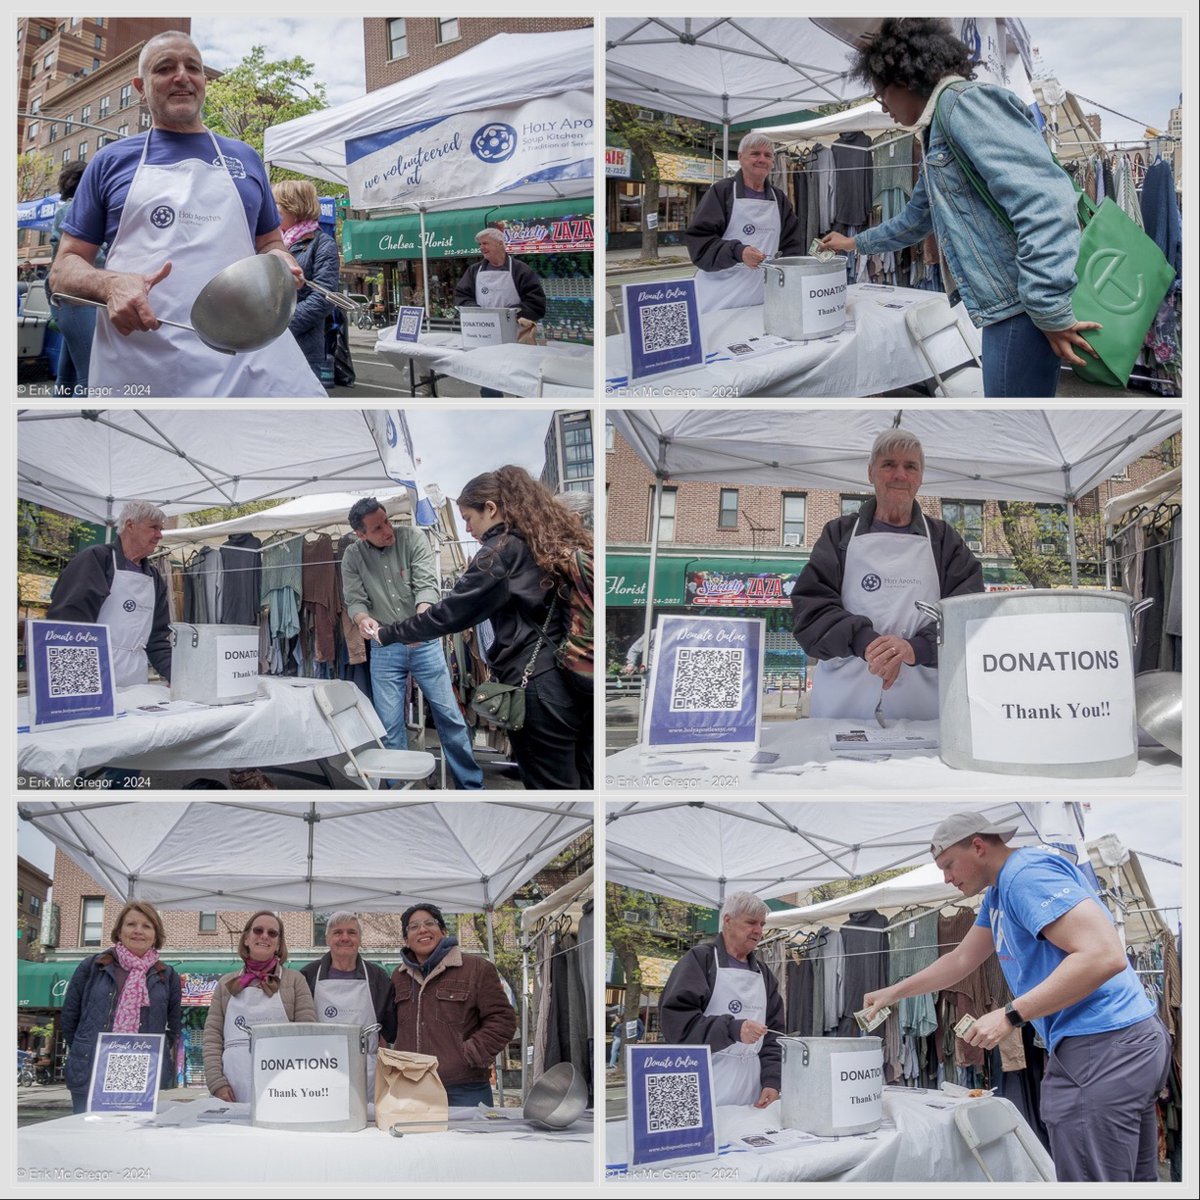 #HolyApostlesSoupKitchen And Pantry Awareness Building At The 8Th Avenue Street Fair flic.kr/s/aHBqjBo9KT

@HolyApostlesNYC #foodforall #FoodJustice #FoodPantry #FeedThePoor #HASK #HealHunger #HolyApostlesNYC #servingthecommunity #SoupKitchen #volunteersmakeadifference